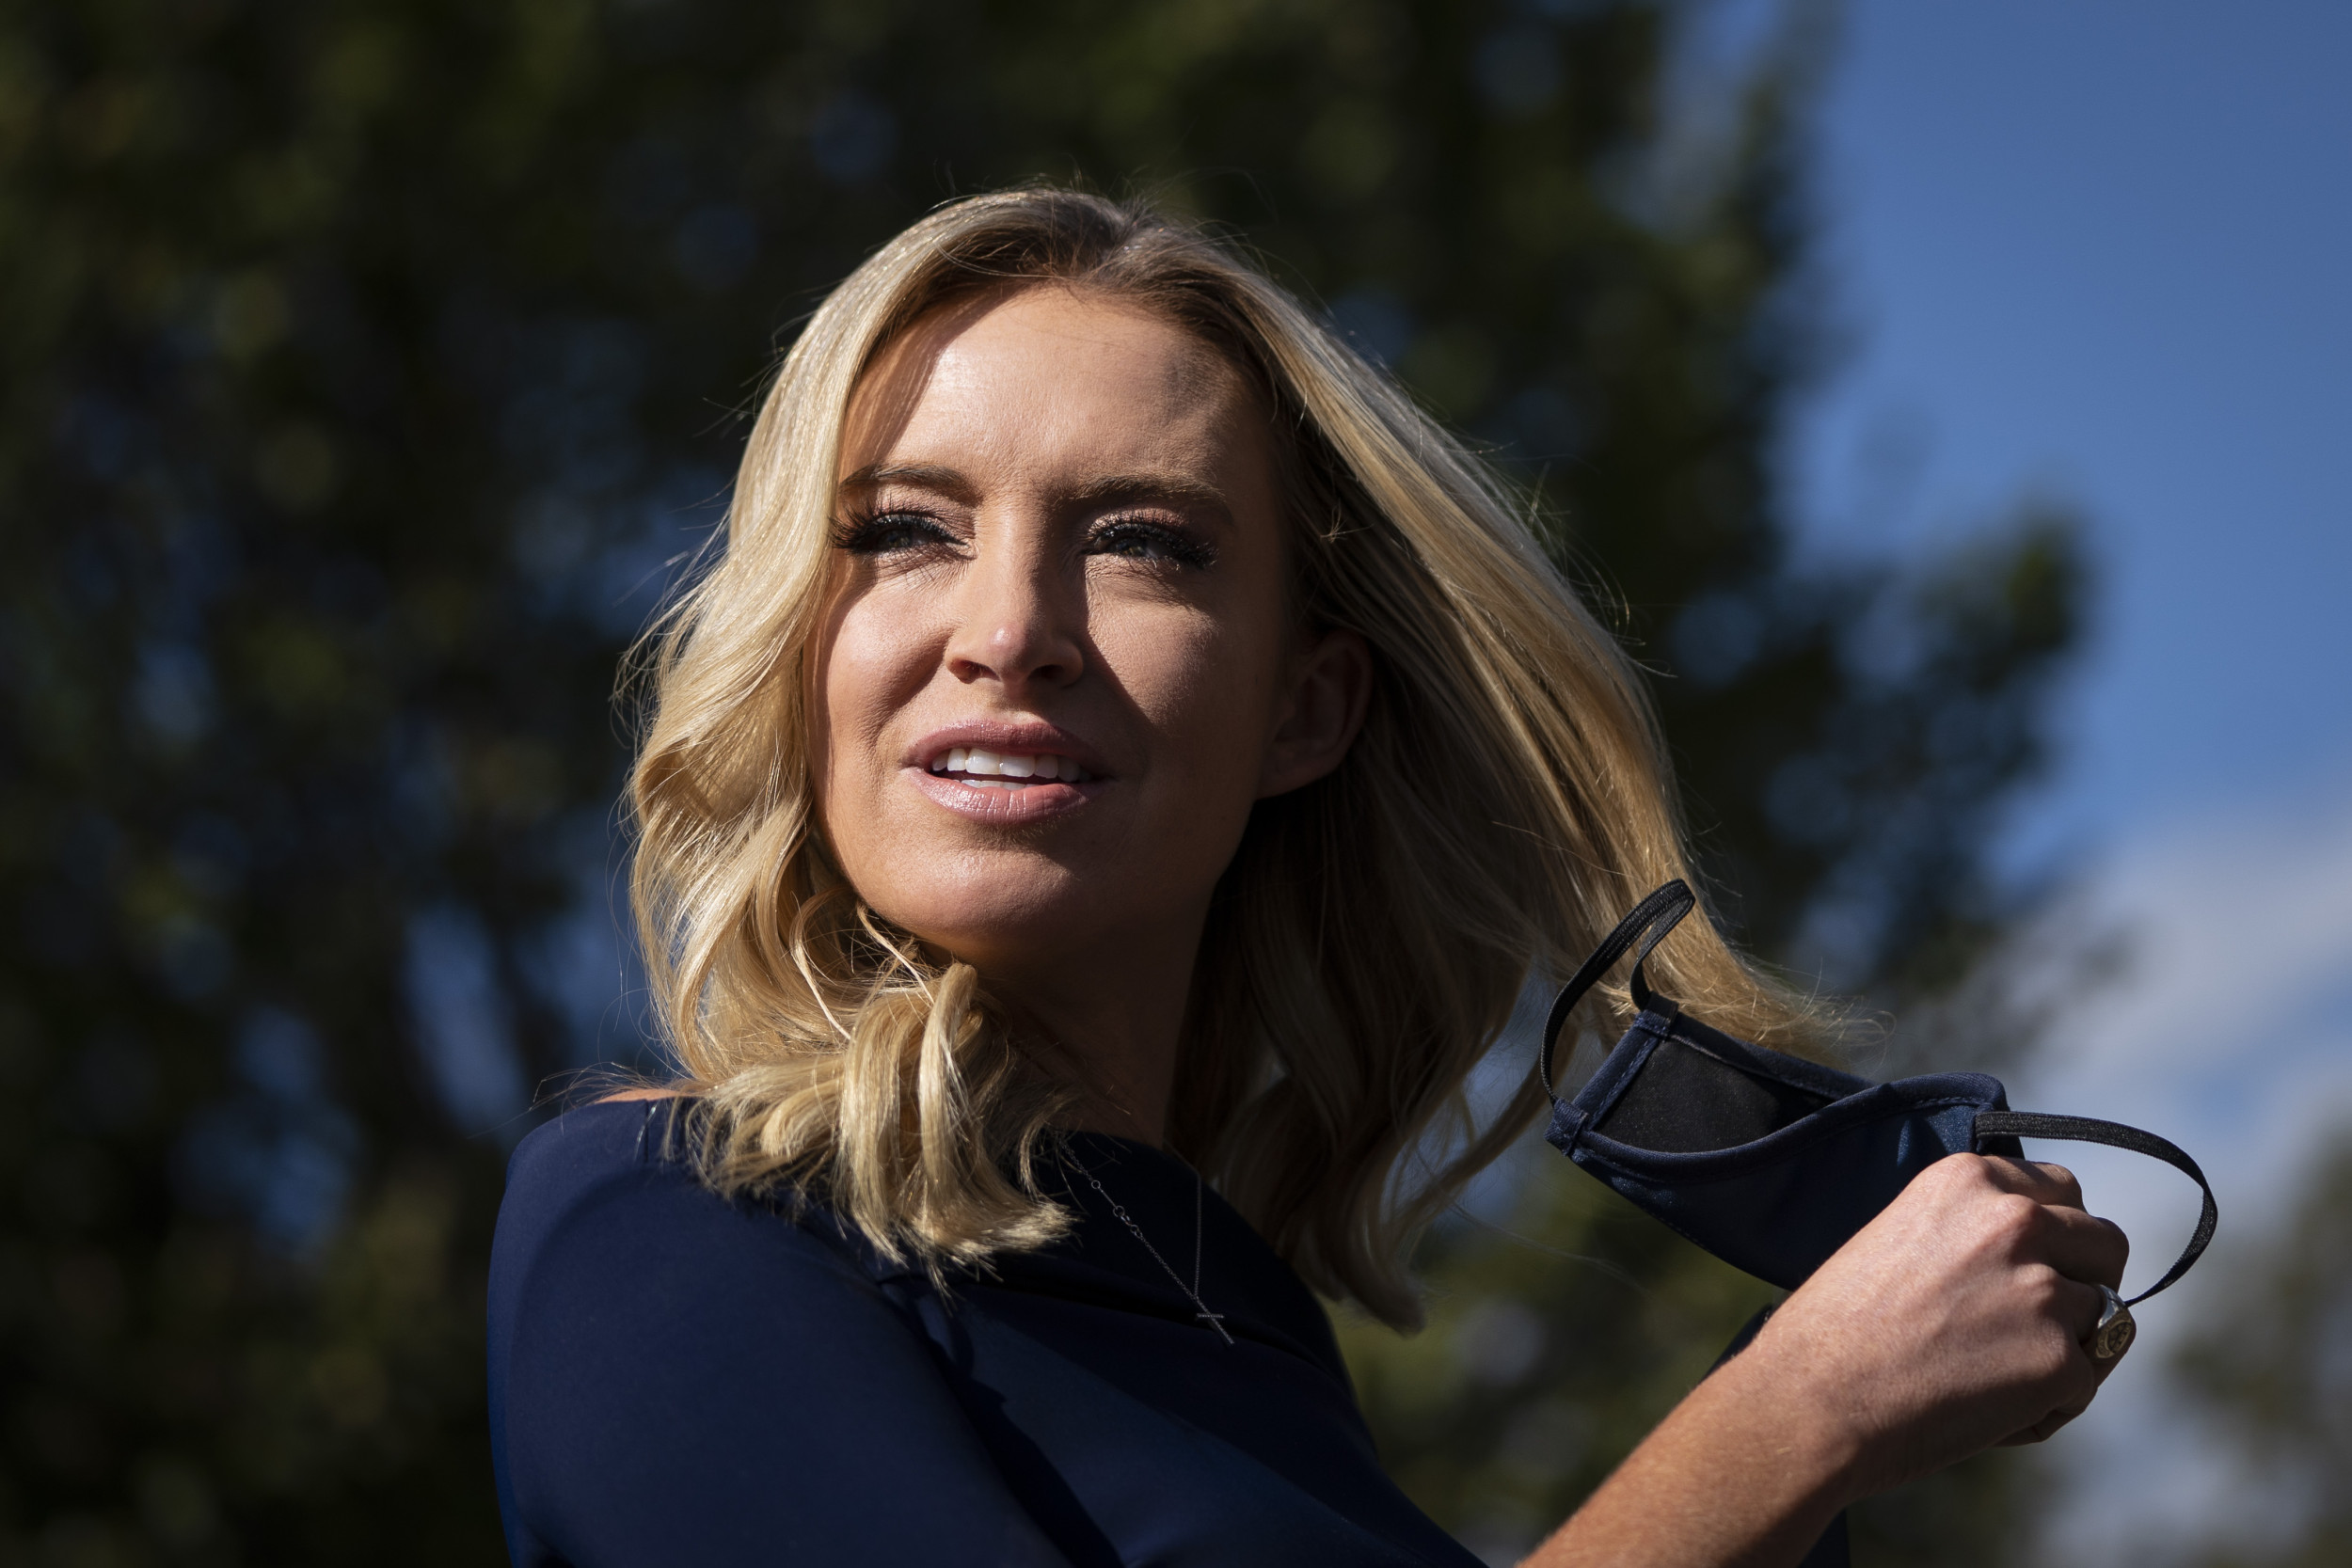 Tucker Carlson Fans Turn on Kayleigh McEnany for Taking Over: ‘Big Mistake’